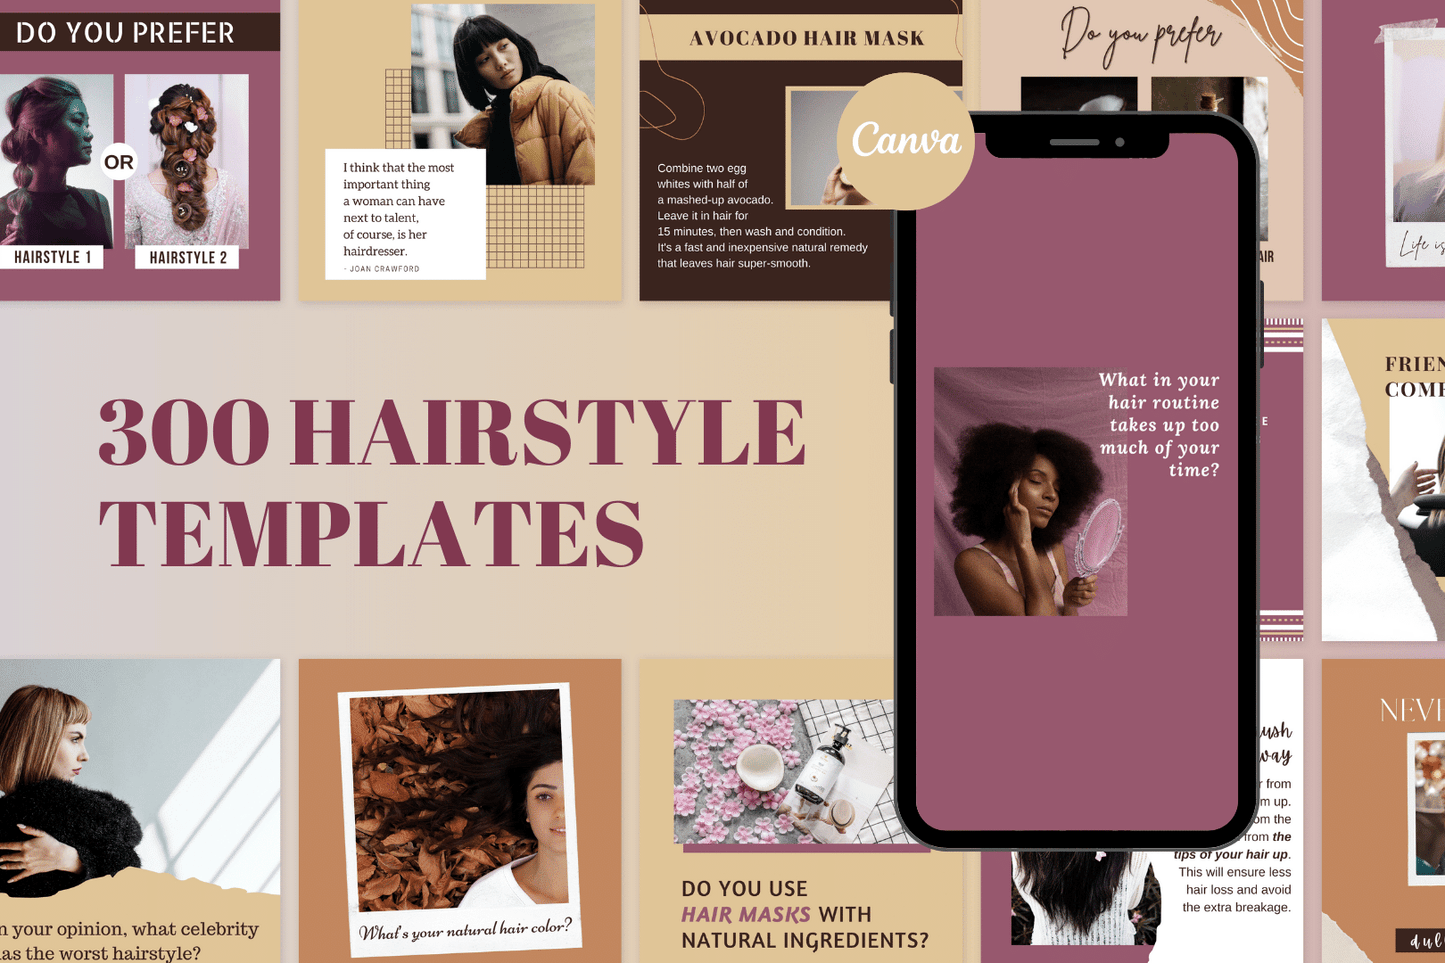 300 Hairstyle Templates for Social Media